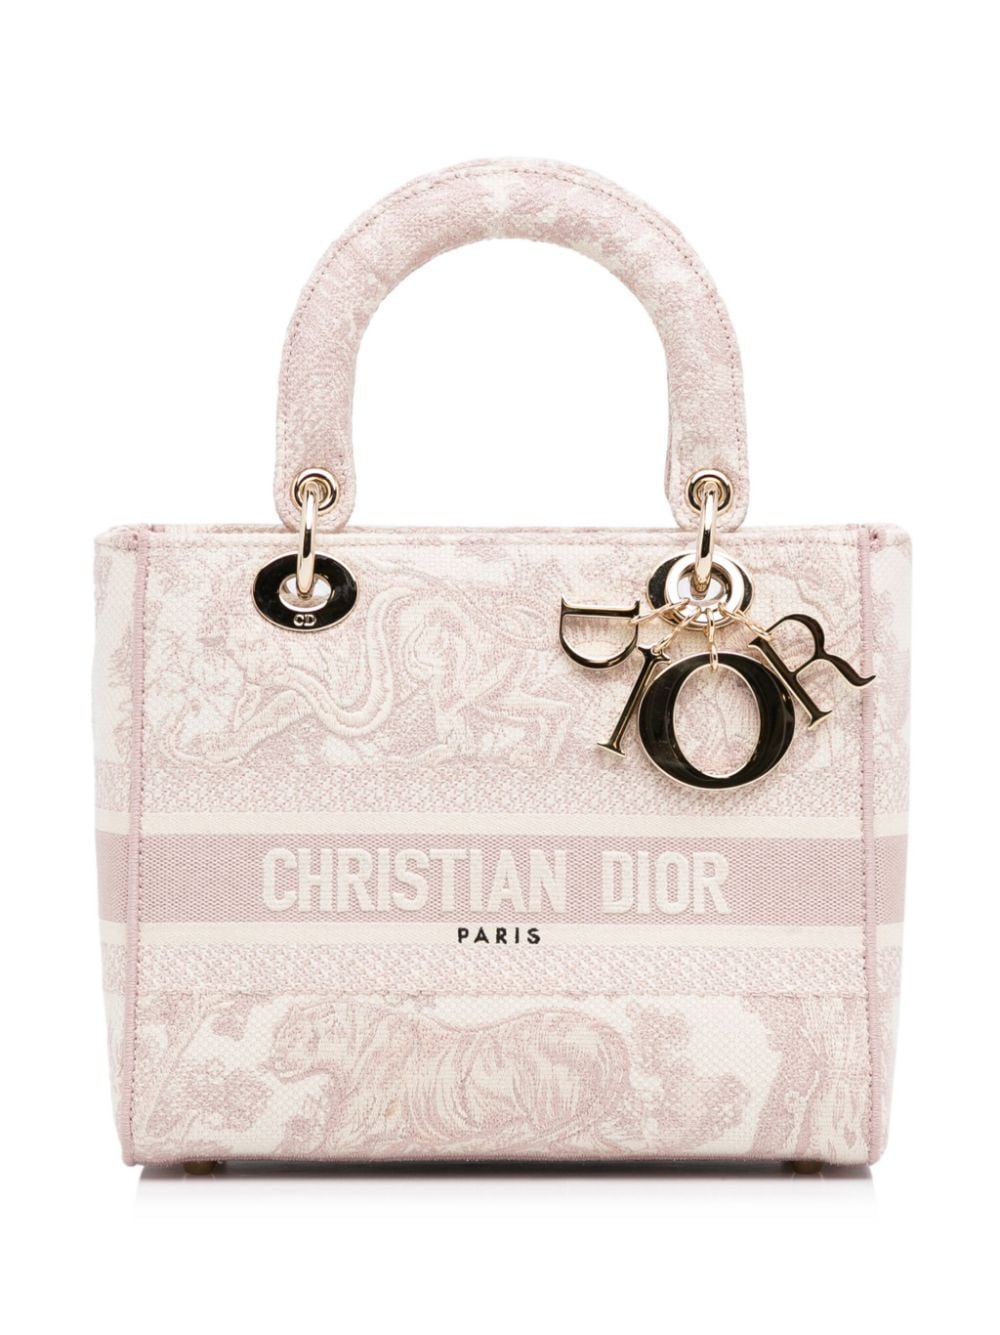 Christian Dior Book Tote Medium, Pink Toile De Jouy, Preowned in